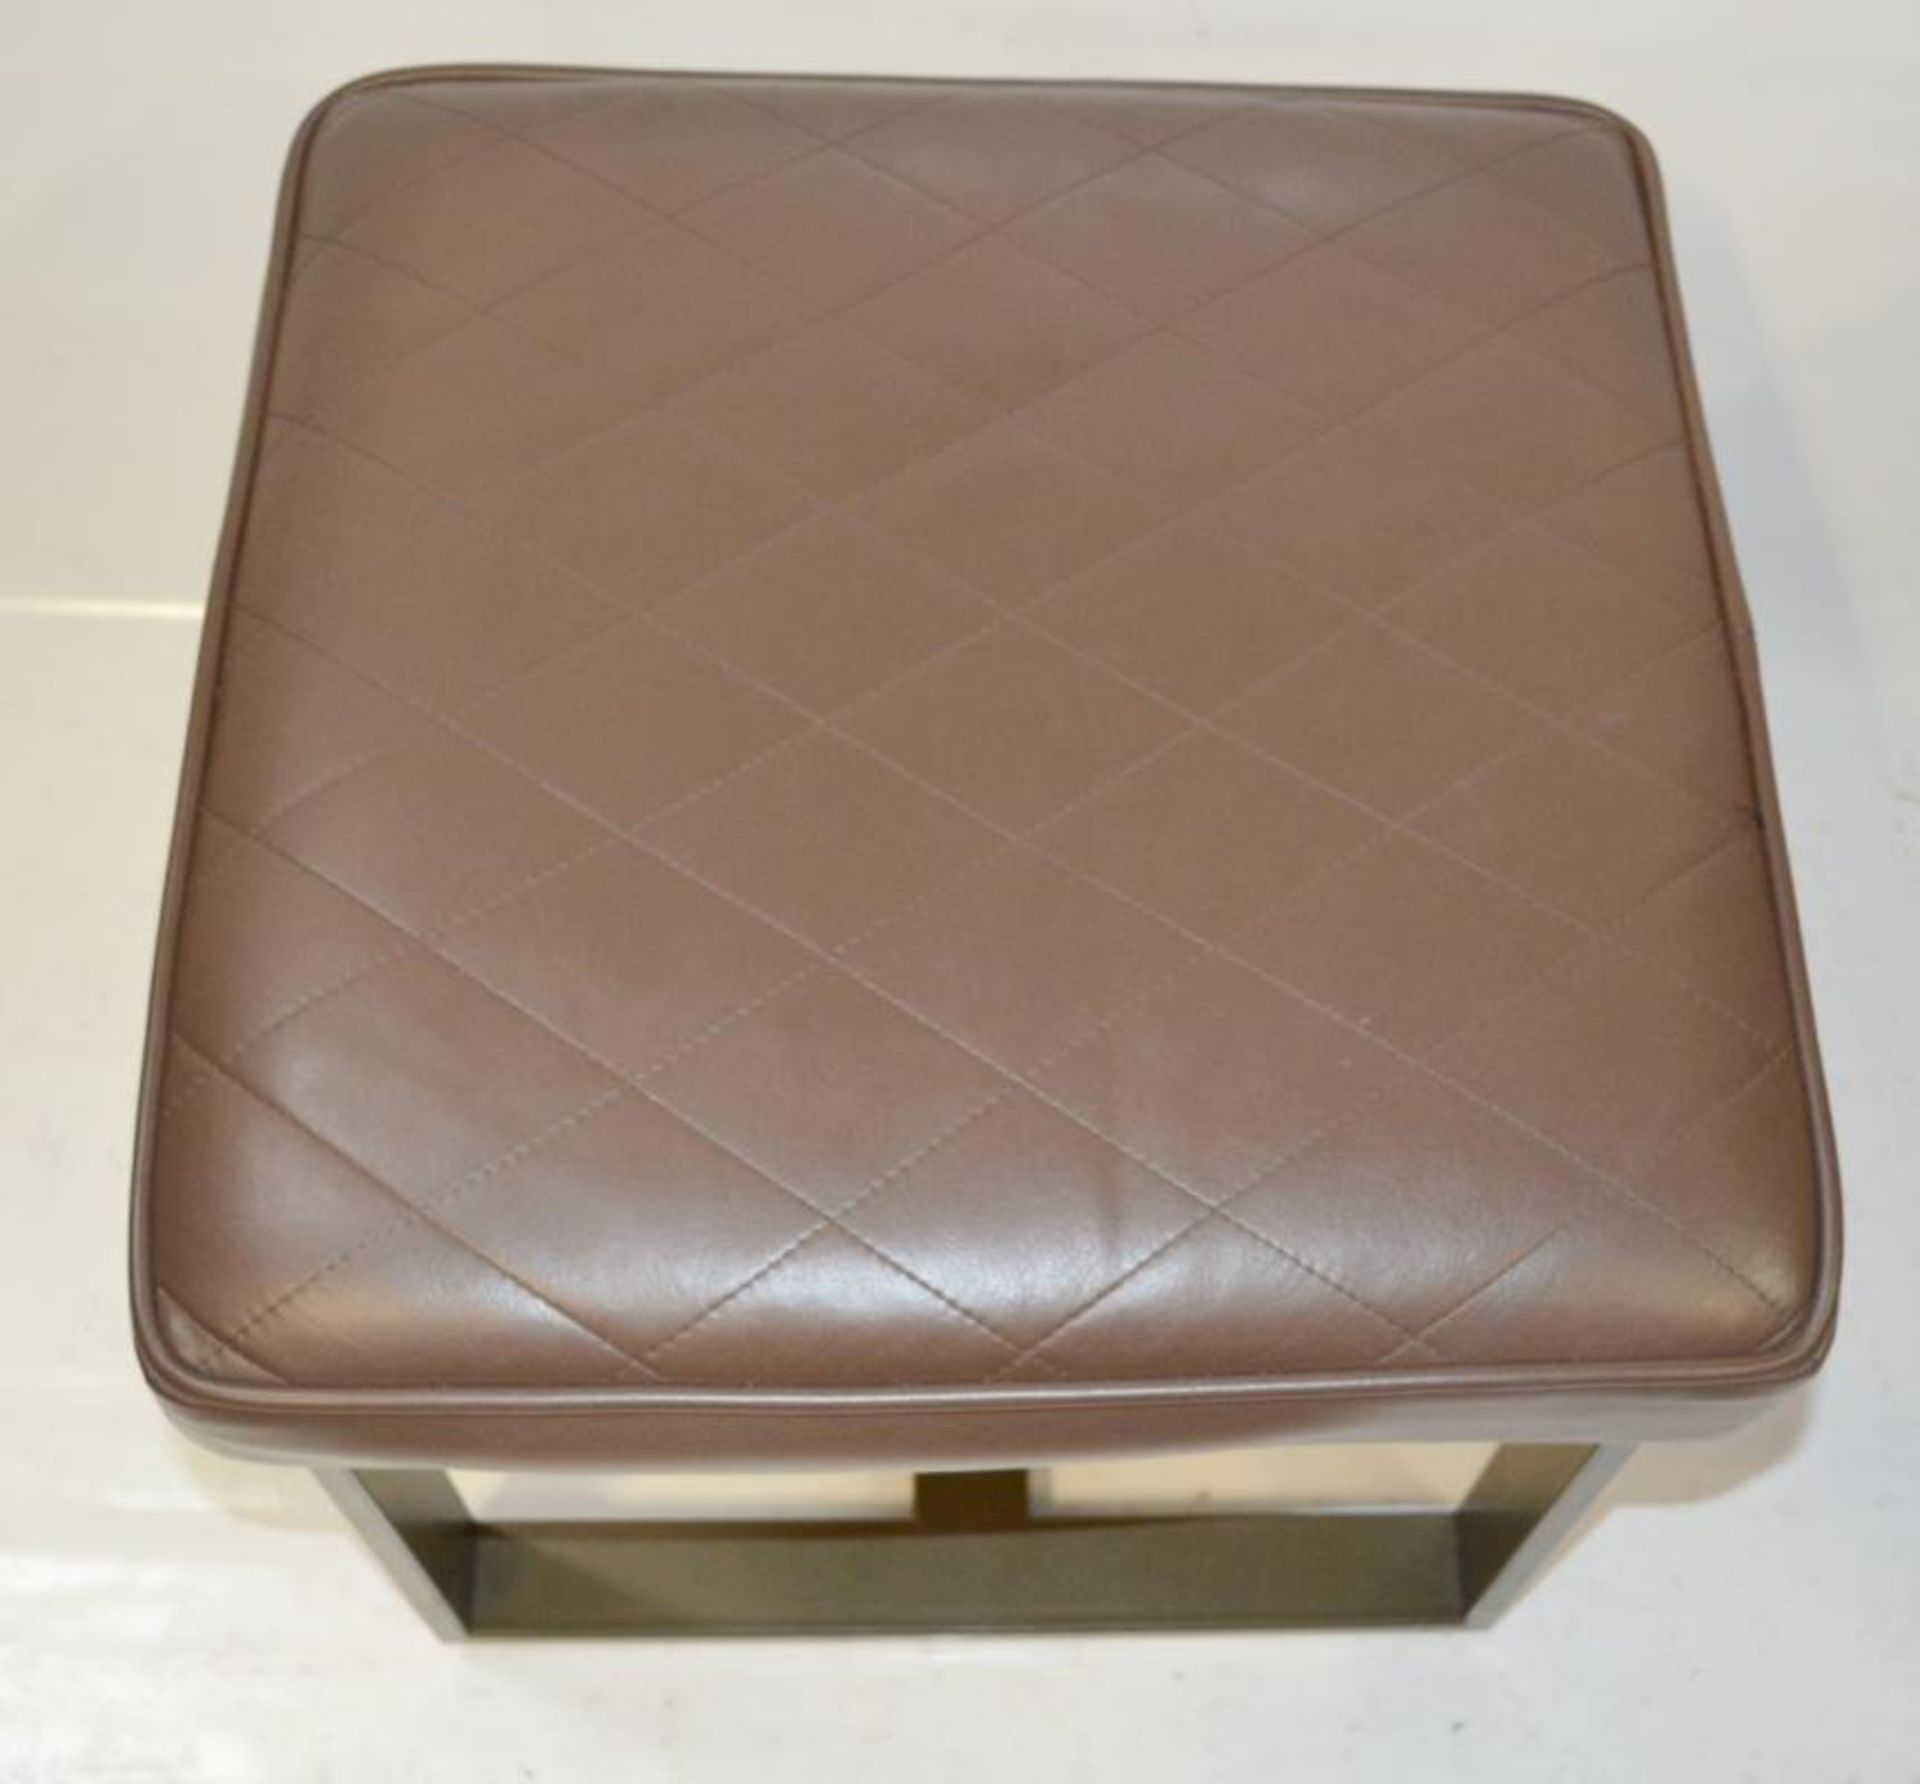 4 x Upholstered Stools In A Brown Faux Leather - Recently Removed From A Major UK Store In Very Goo - Image 4 of 5